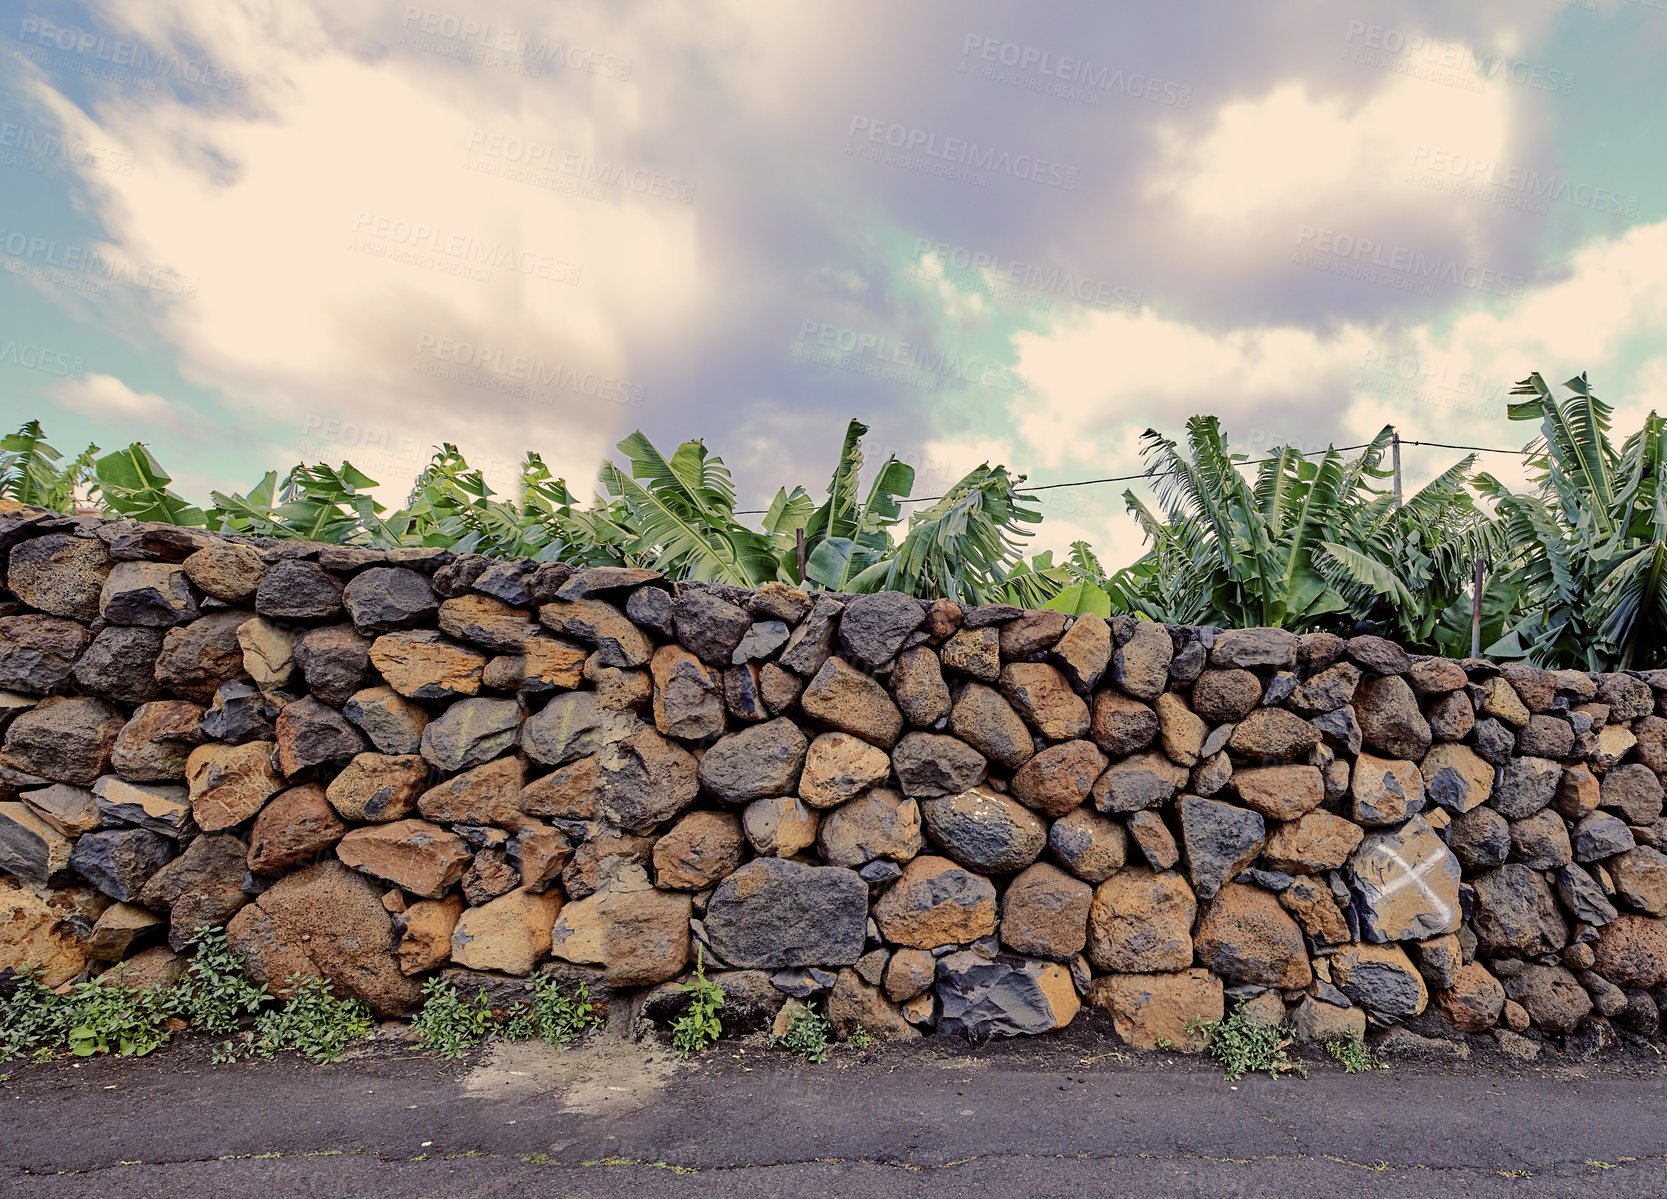 Buy stock photo Copyspace with palm trees behind an old stone wall in La Palma, Canary Islands, Spain against a cloudy sky background. Rough exterior architecture with plants growing in a remote tropical destination